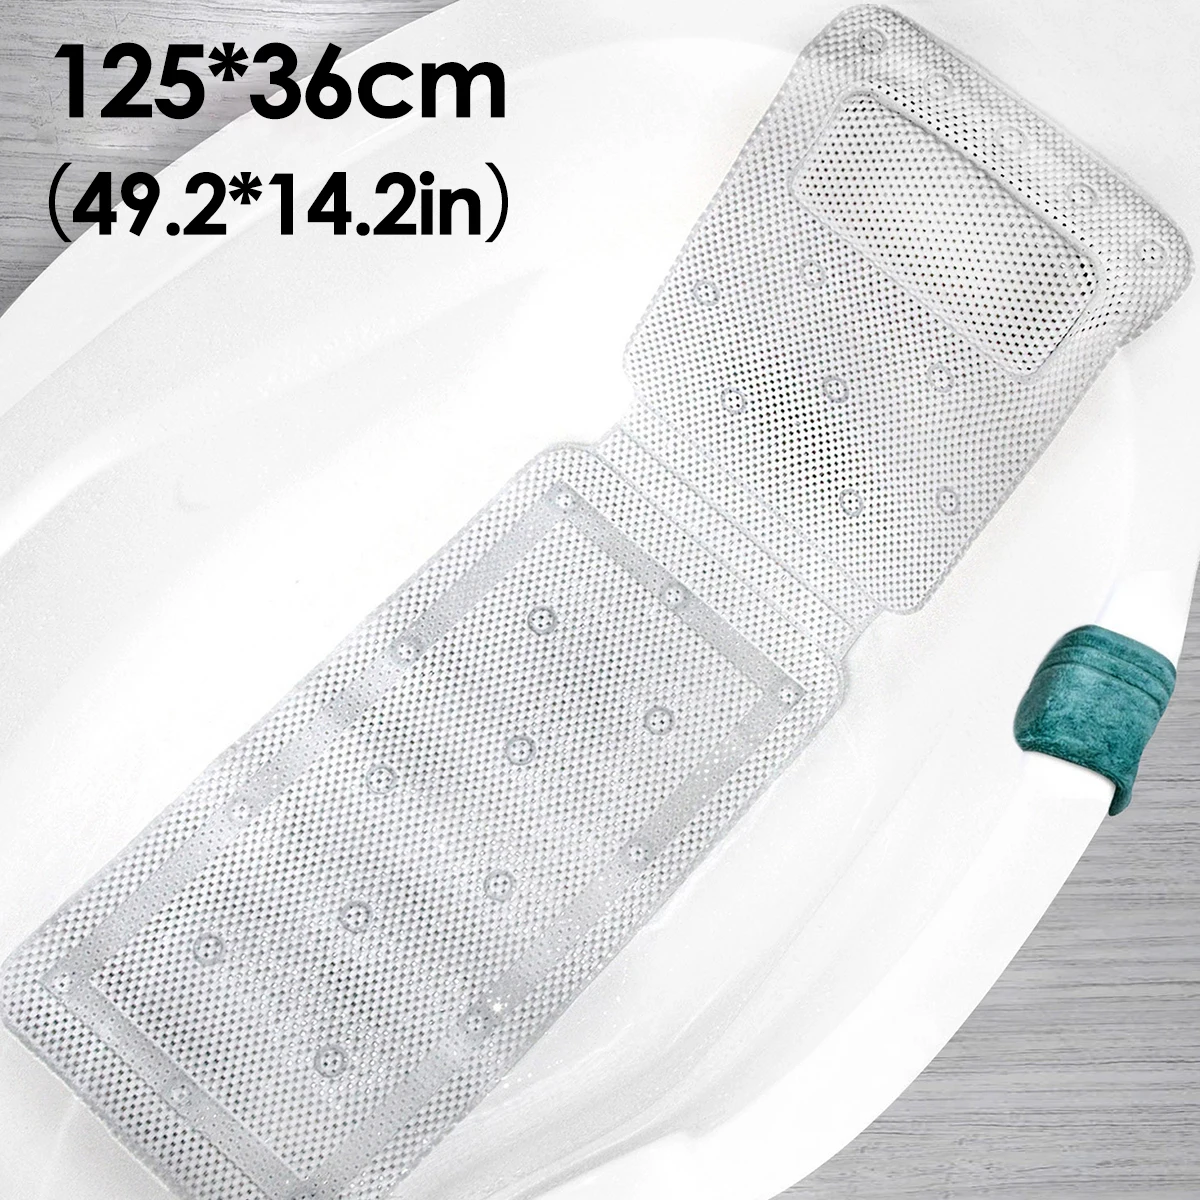 For Head And Neck Rest Bathtub Pillows With 30 Non-slip Suct